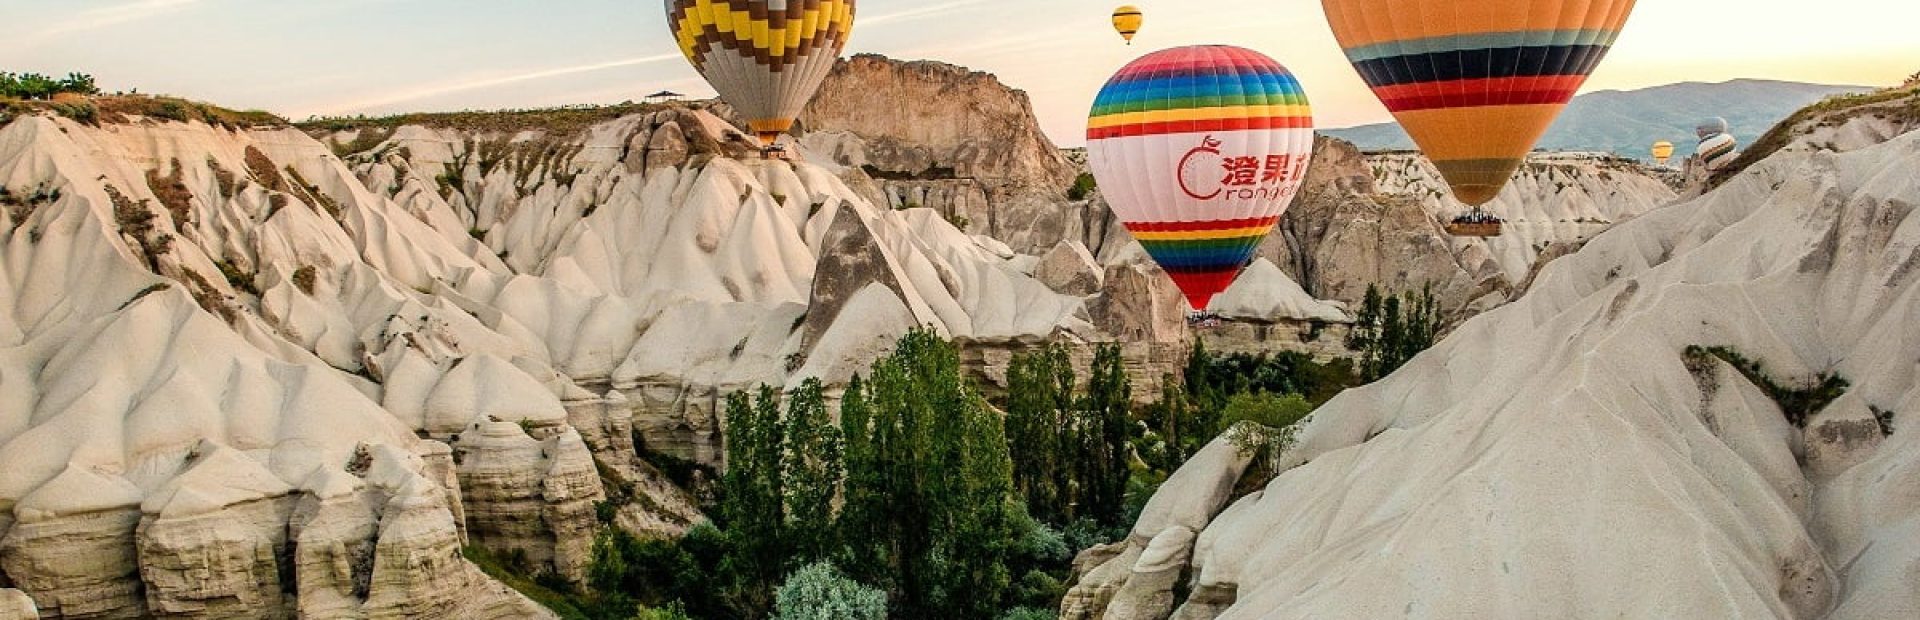 hot-air-balloon-Turkey-Glimpses-of-the-World